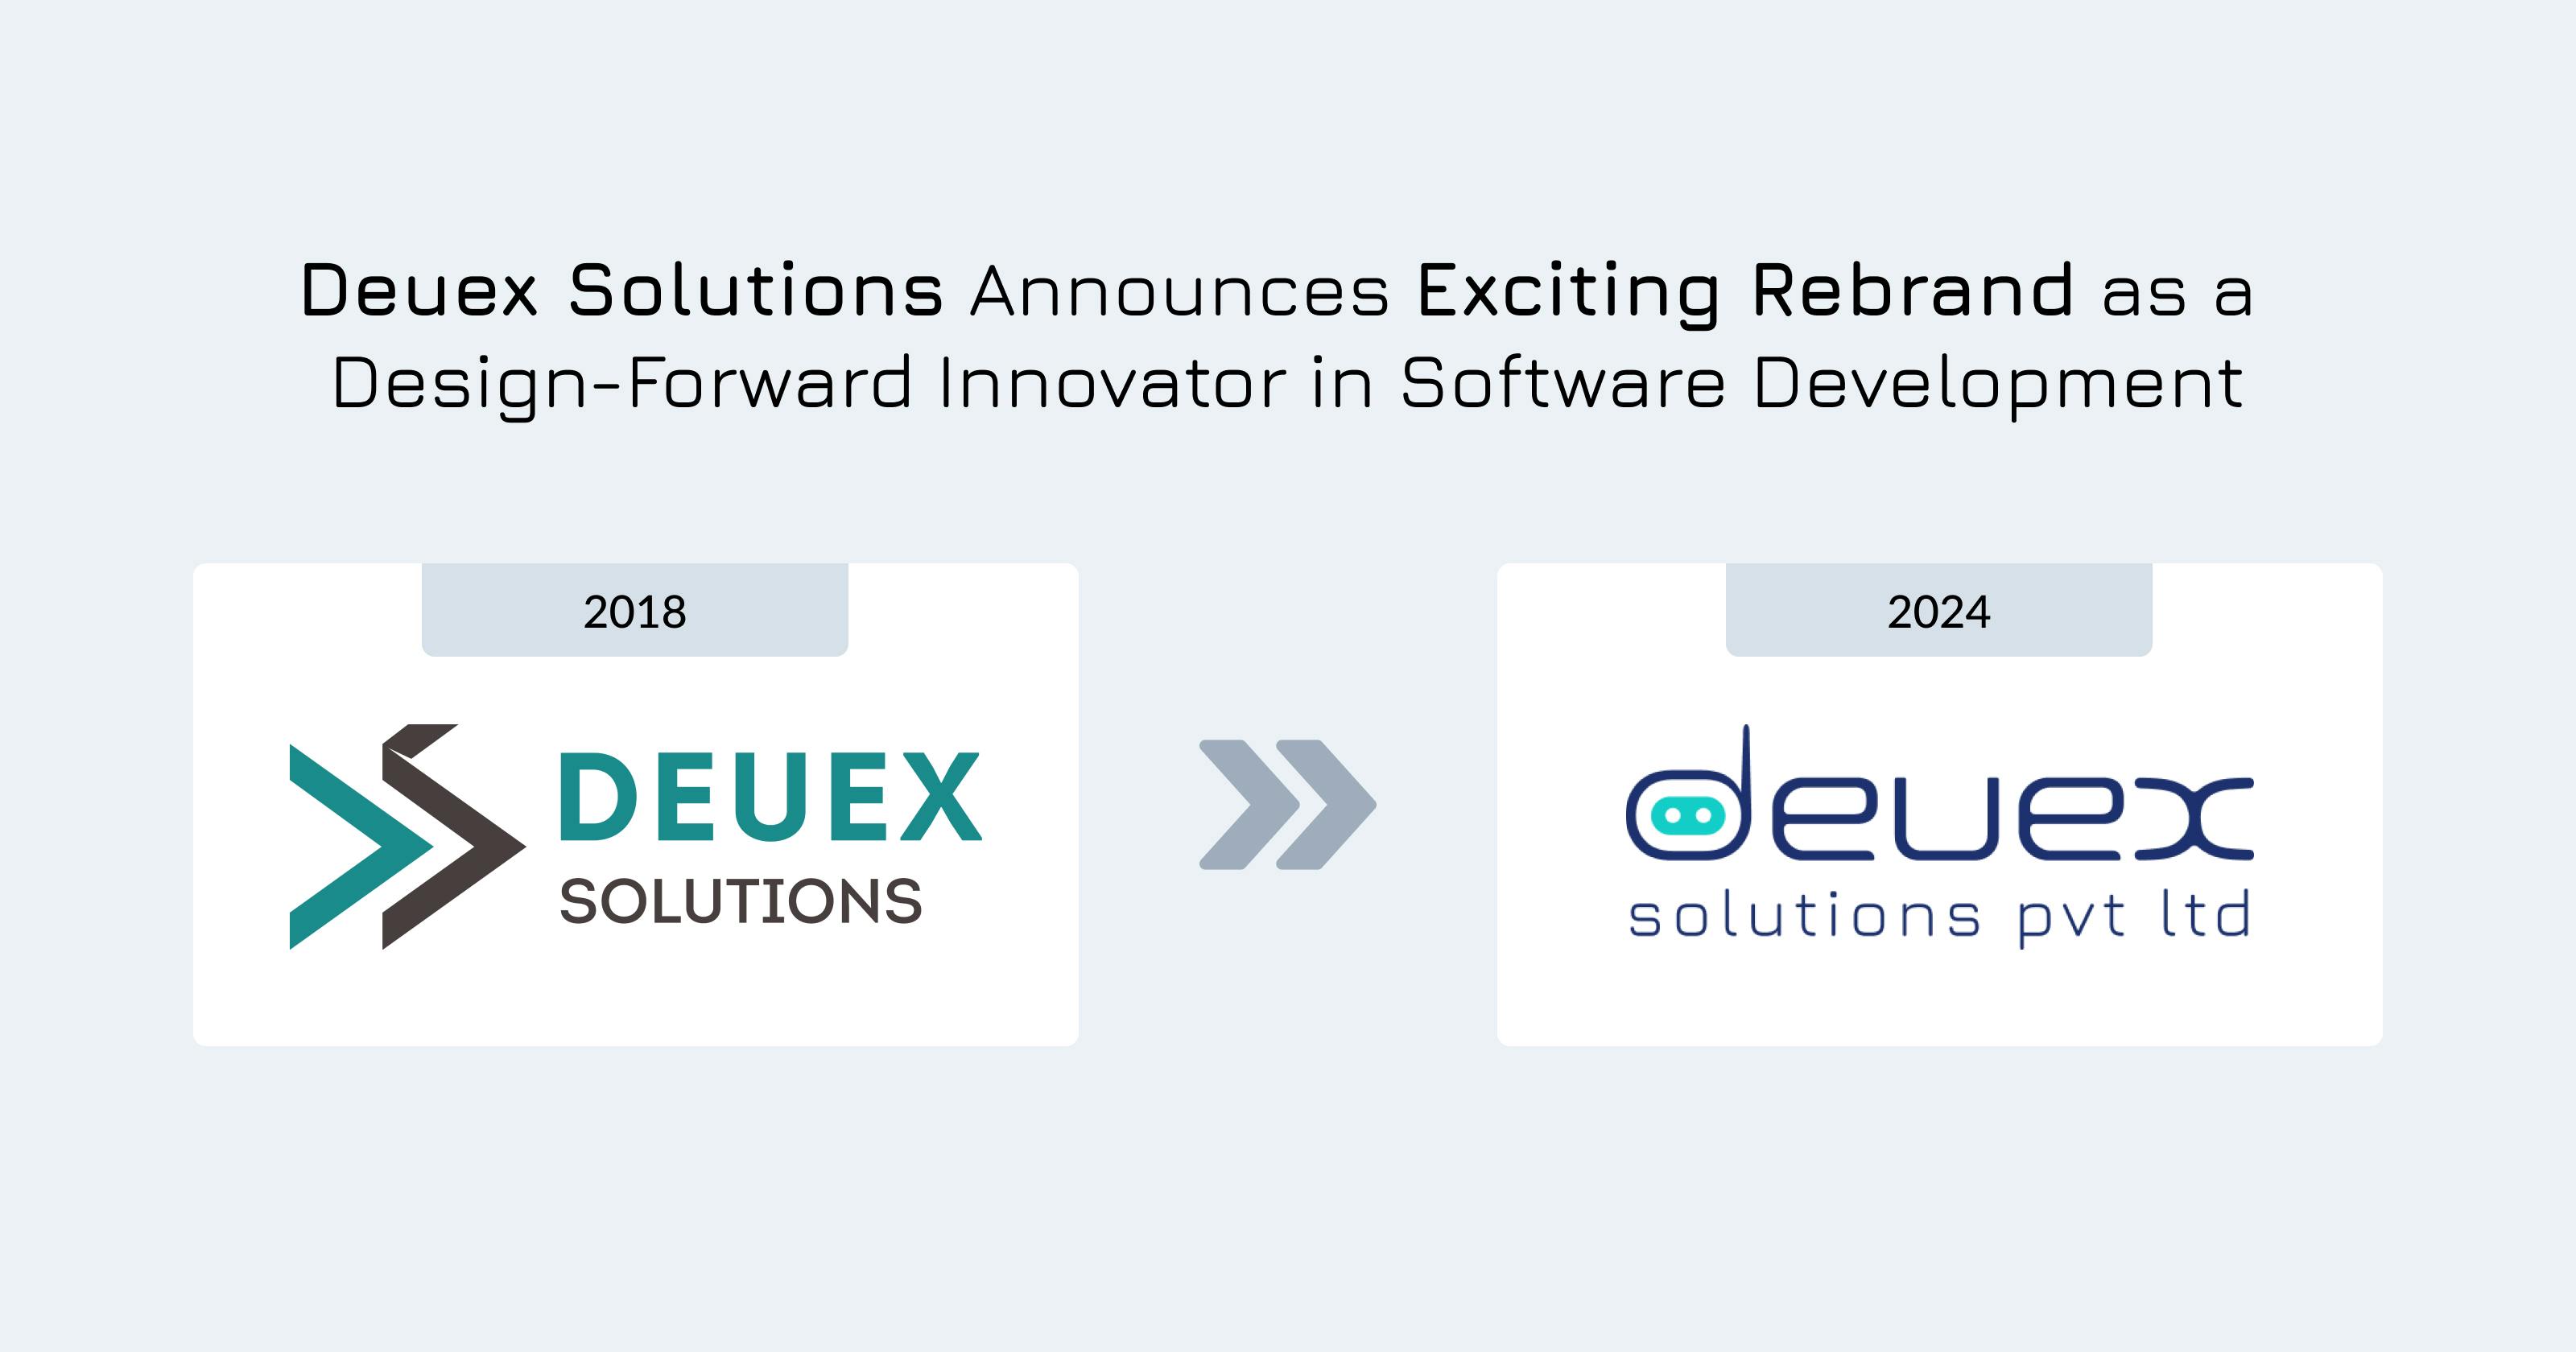 Deuex Solutions' Rebrand Positions Company as a Leading Design-Driven Software Creation Studio